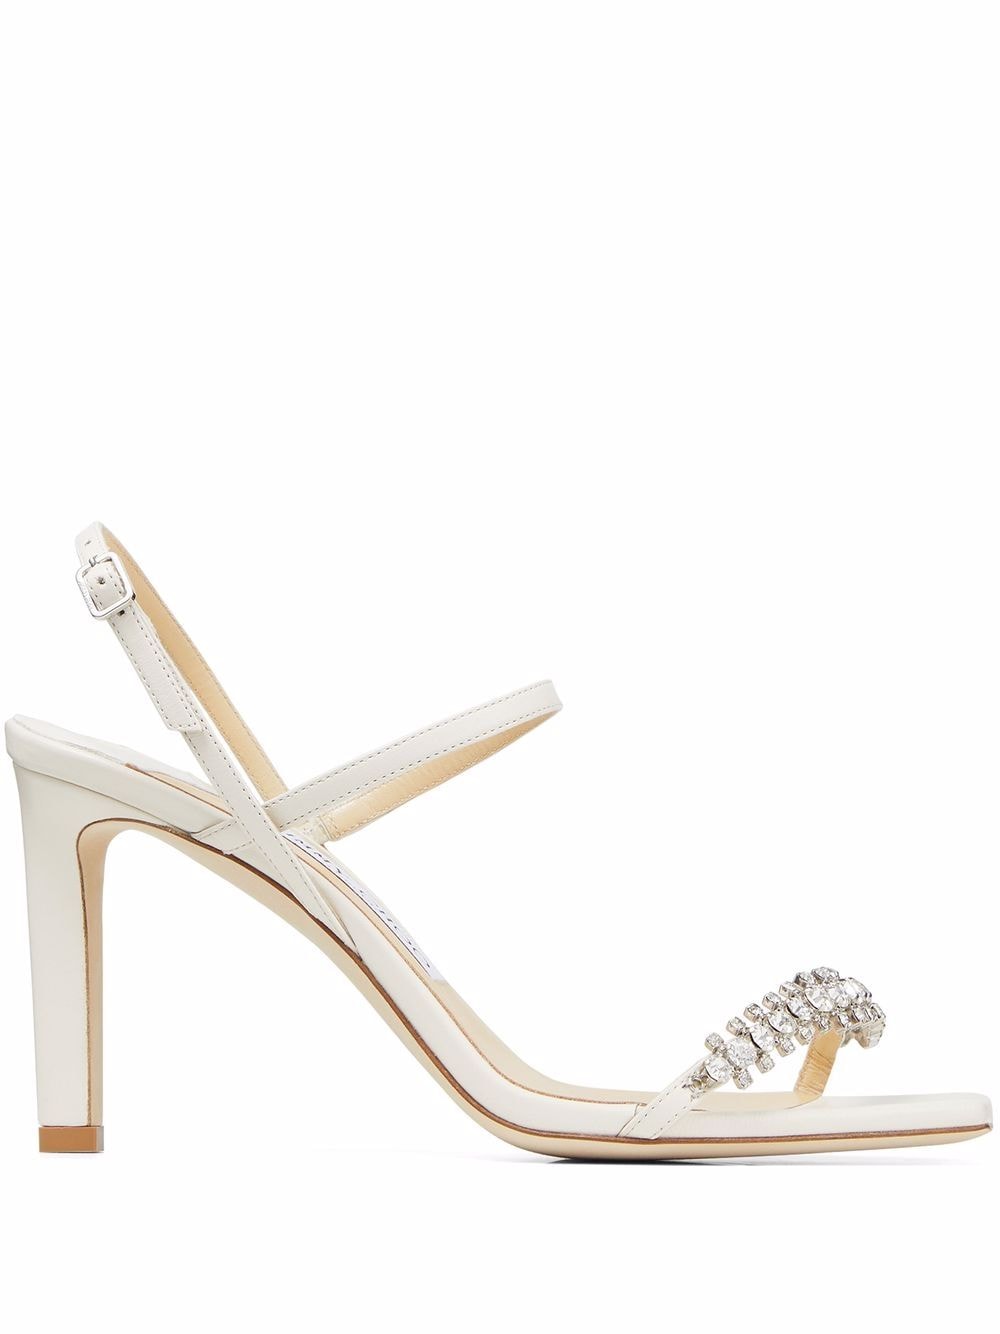 Image 1 of Jimmy Choo Meira 85 sandals